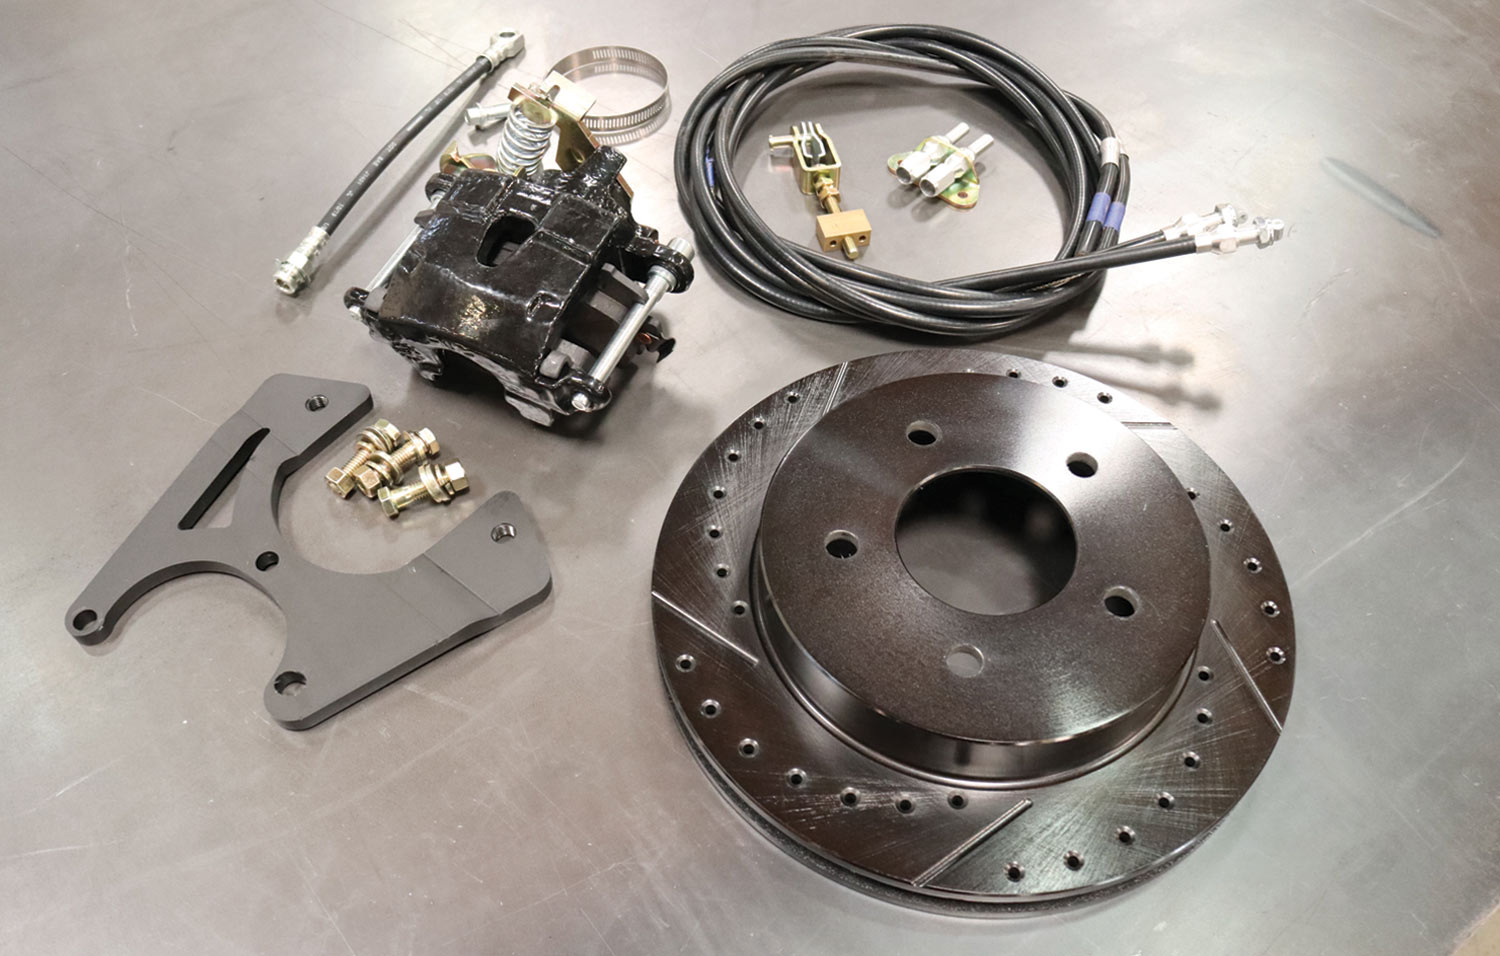 parts from Performance Online’s Blackout Series rear disc kit for the ’88-98 Chevy/GMC 1/2-tons (PN RWB58898) laid out, including a set of coated, drilled-and-slotted 11.75-inch rotors, parking brake–equipped GM single-piston calipers with laser-cut brackets, rubber flex hose, and trim-to-fit parking brake cables